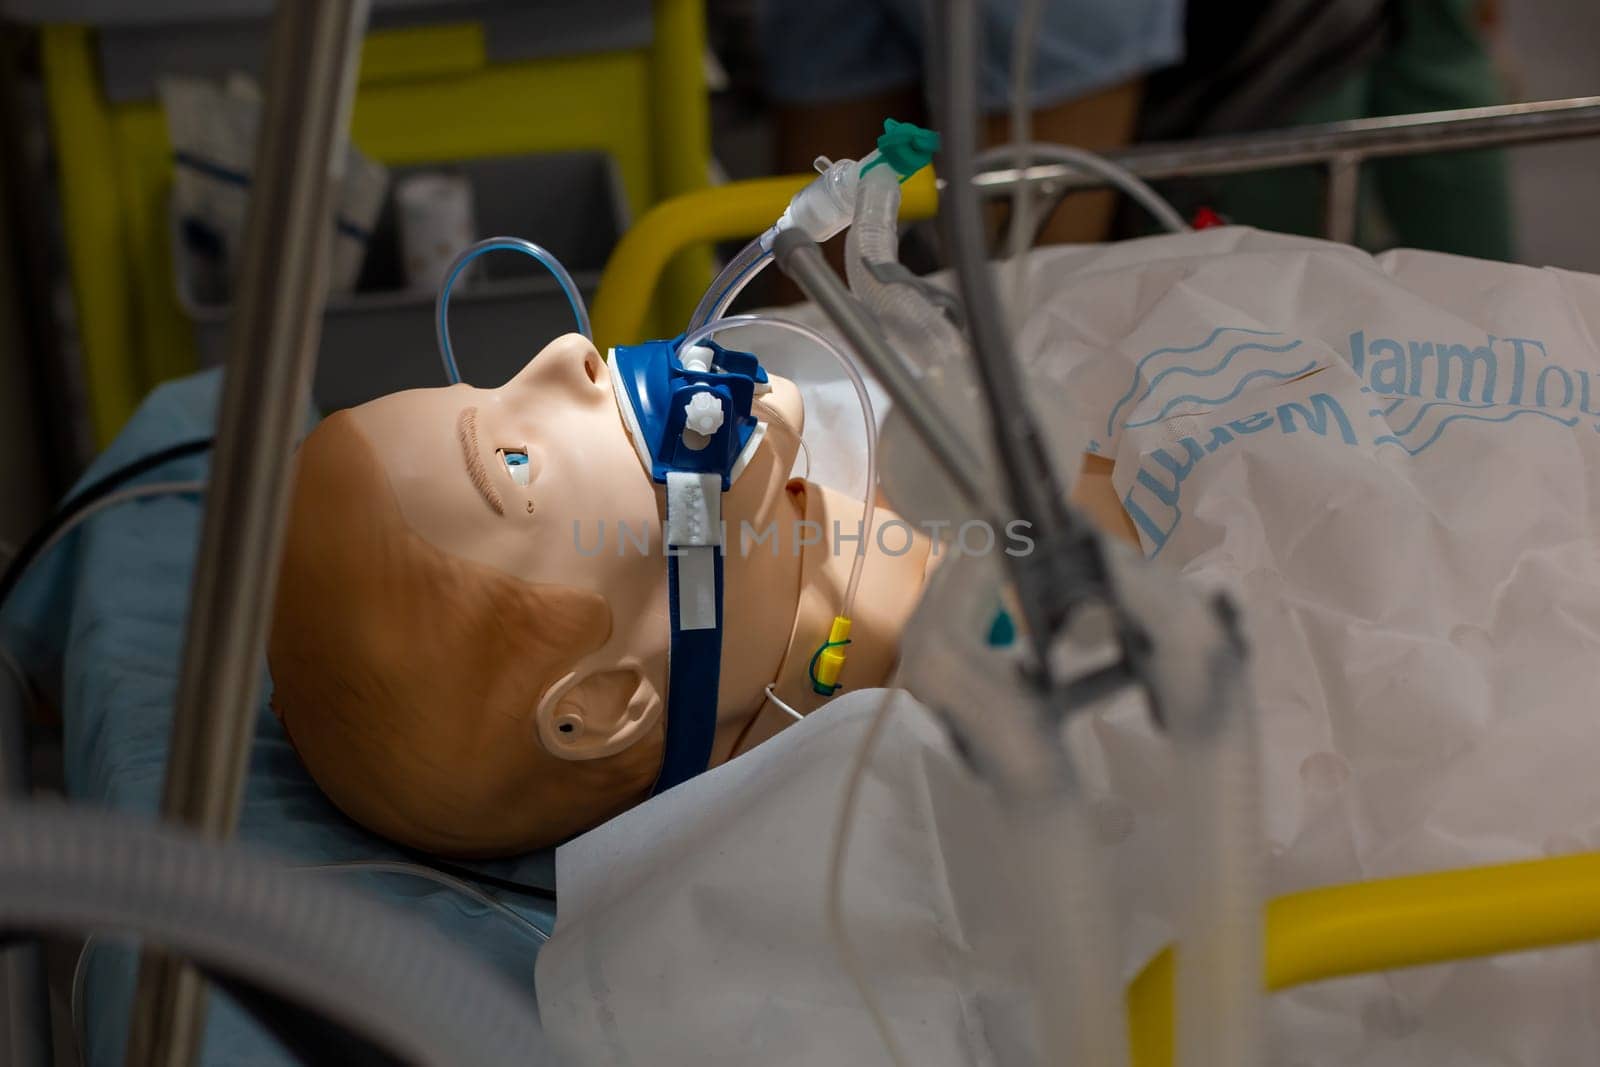 Moscow, Moscow region, Russia - 03.09.2023:Medical training dummy with ventilation equipment in an ICU setting by Zakharova